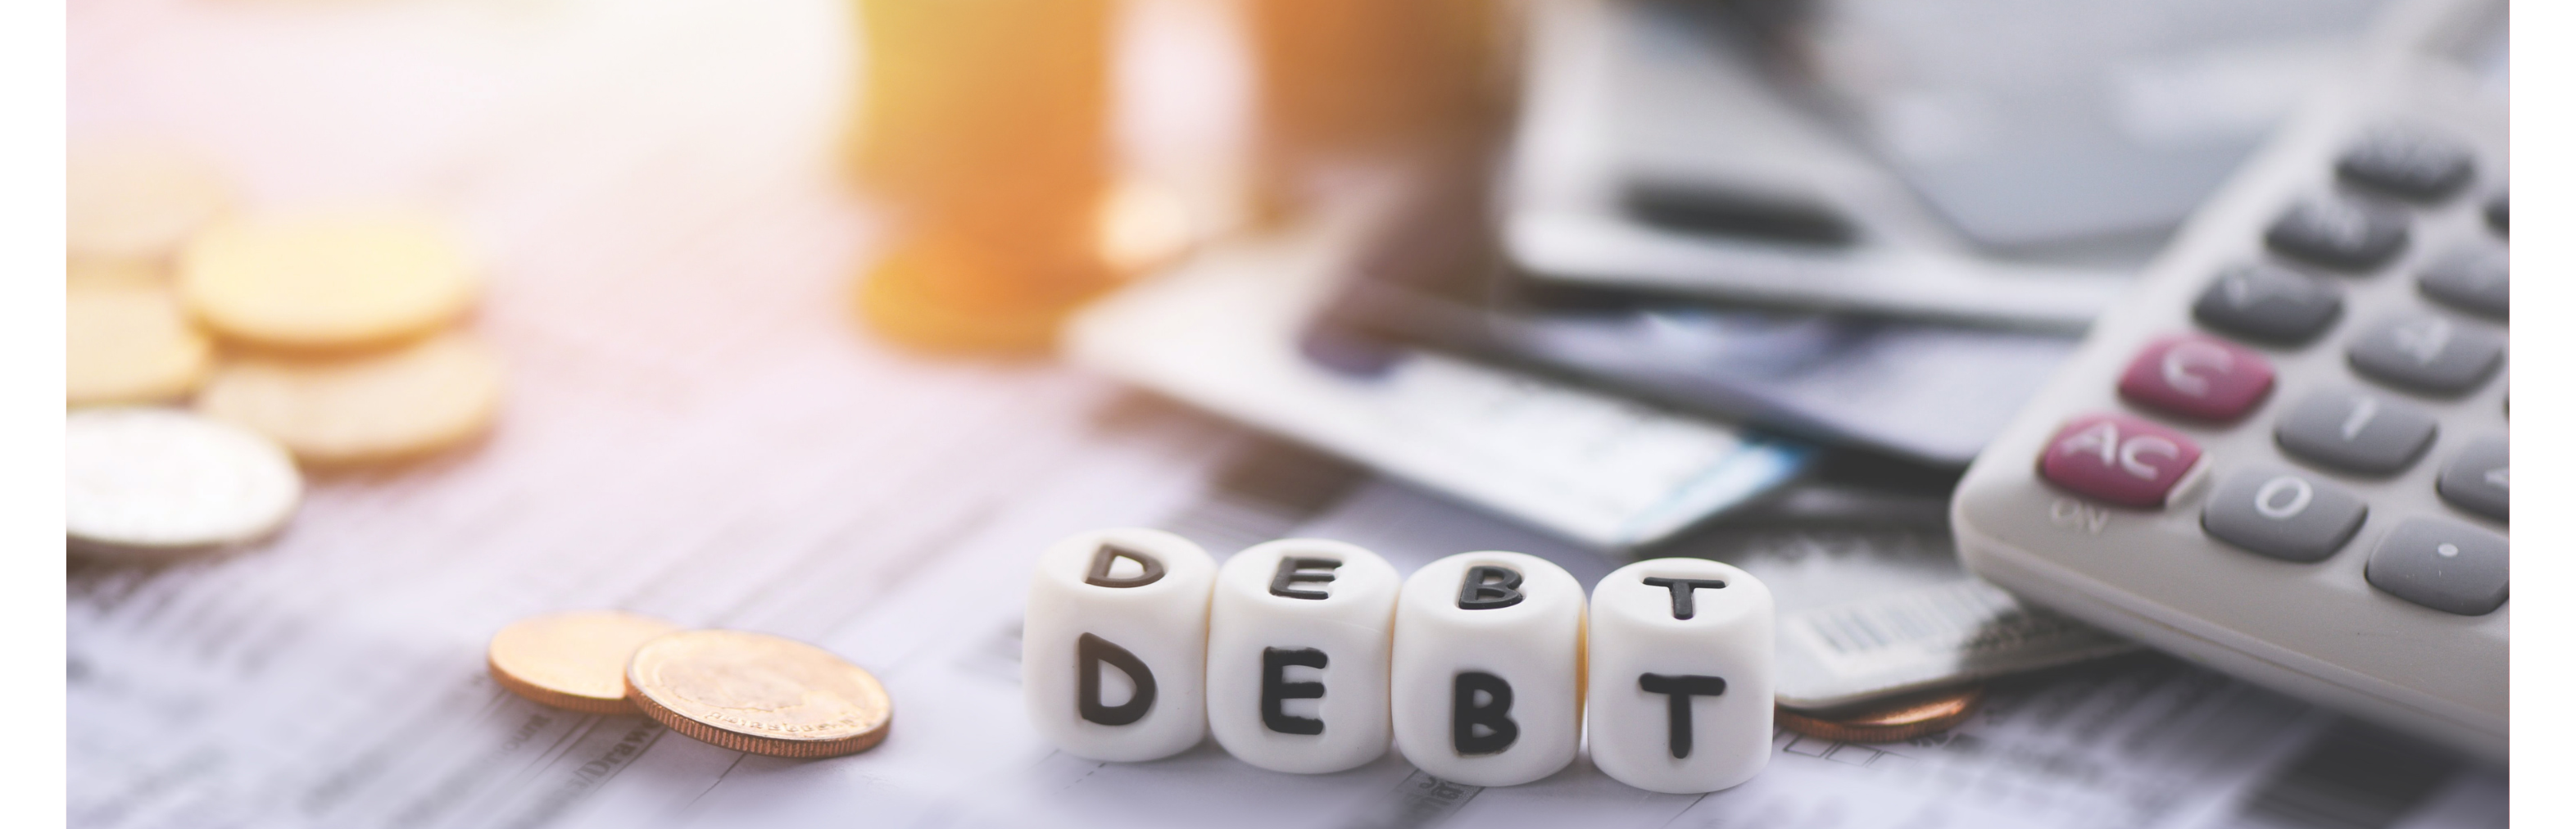 Work with a credible debt management company to pay off your debt